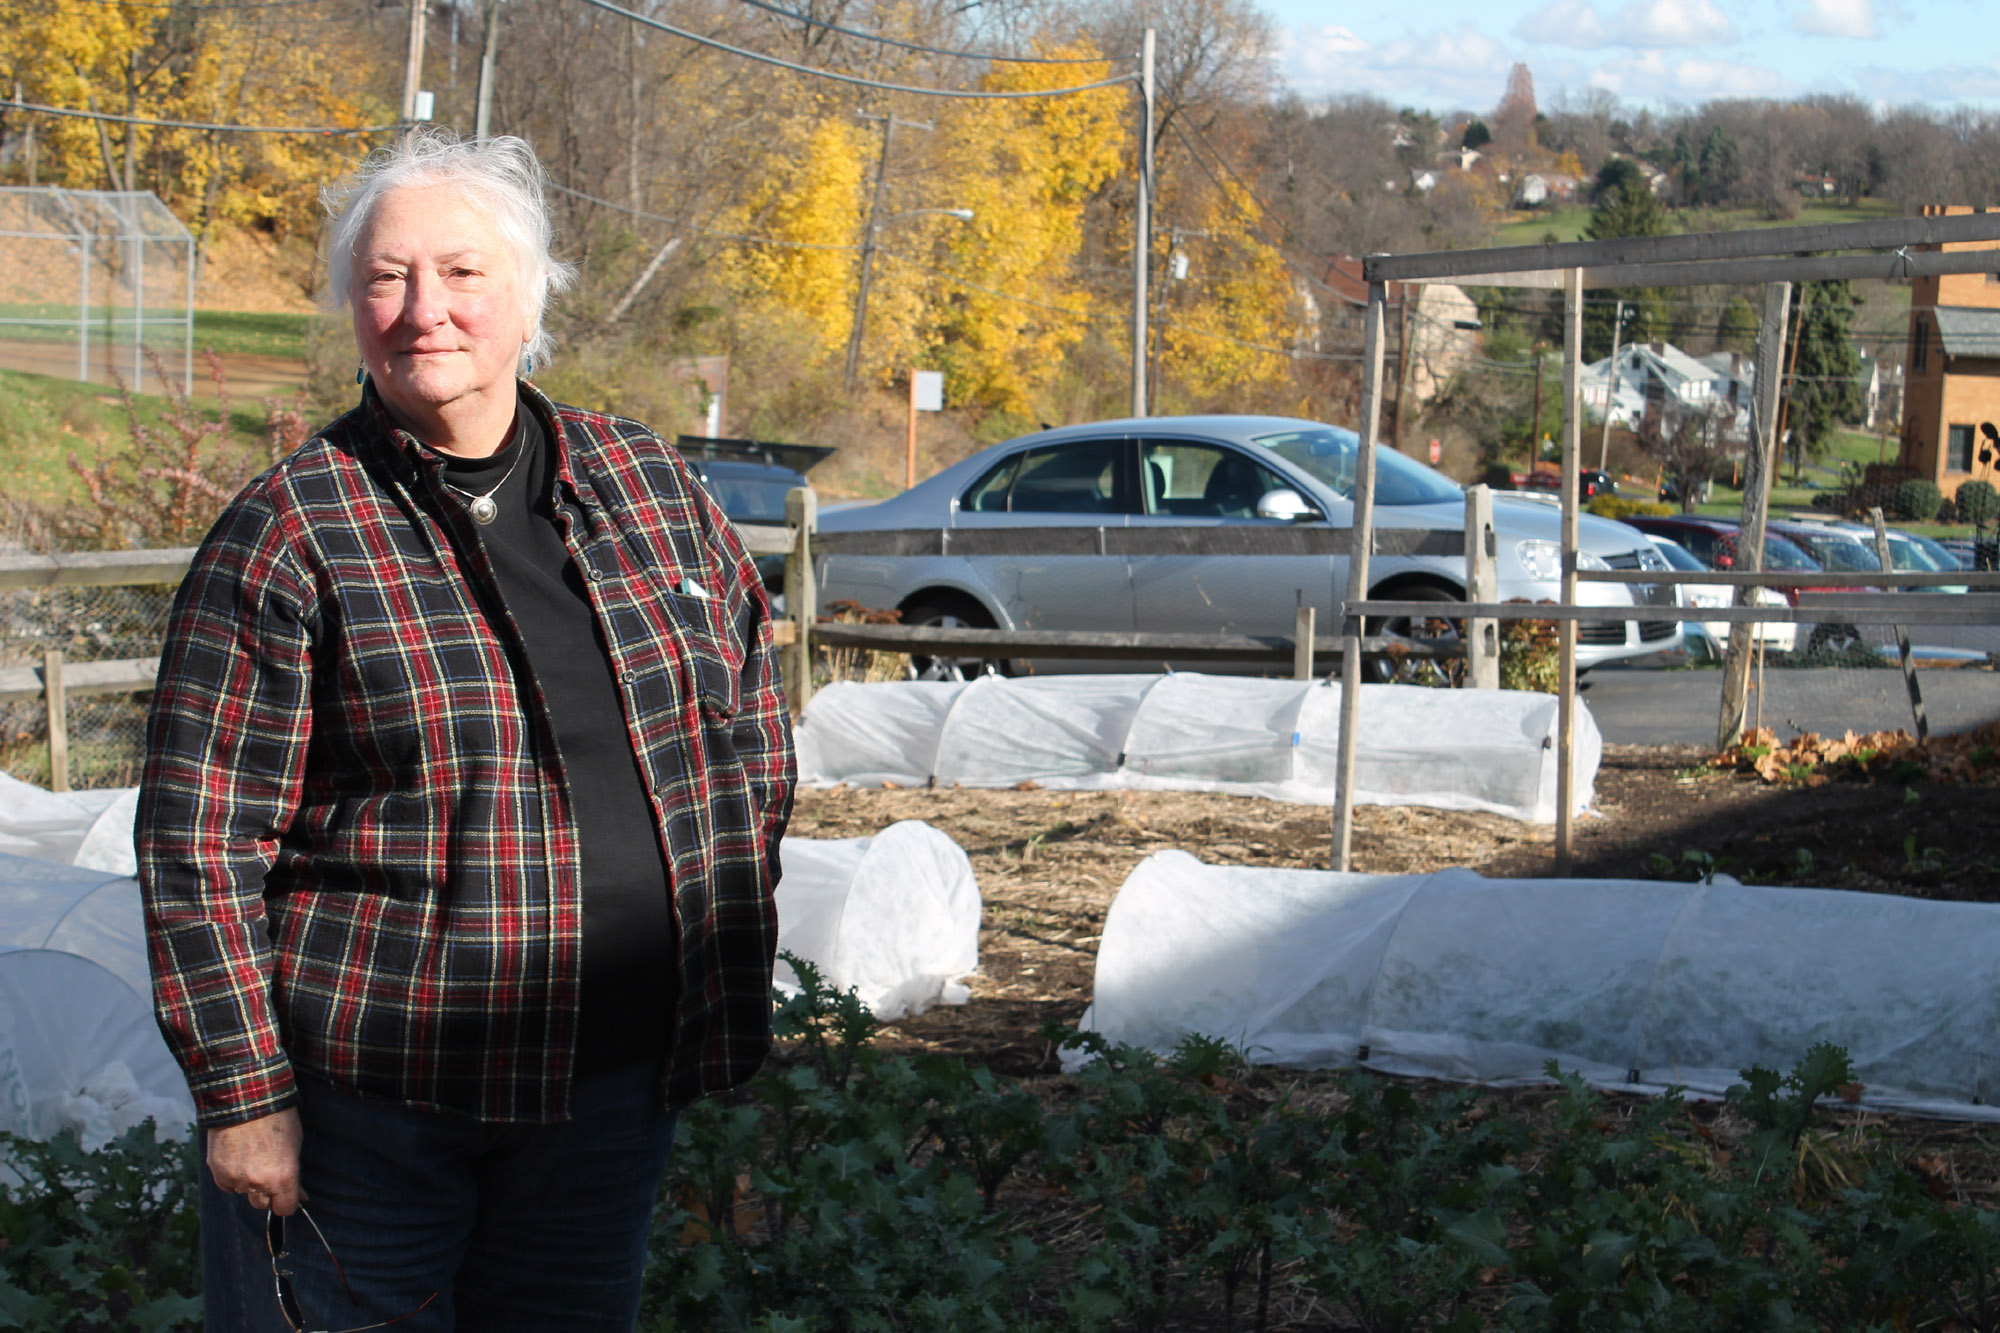 Pat Eagon stands outside the garden near the South Hills Interfaith Ministries food pantry in Pittsburgh. Last year, Eagon helped grow 15,000 pounds of fresh produce for the pantry. Photo: Julie Grant